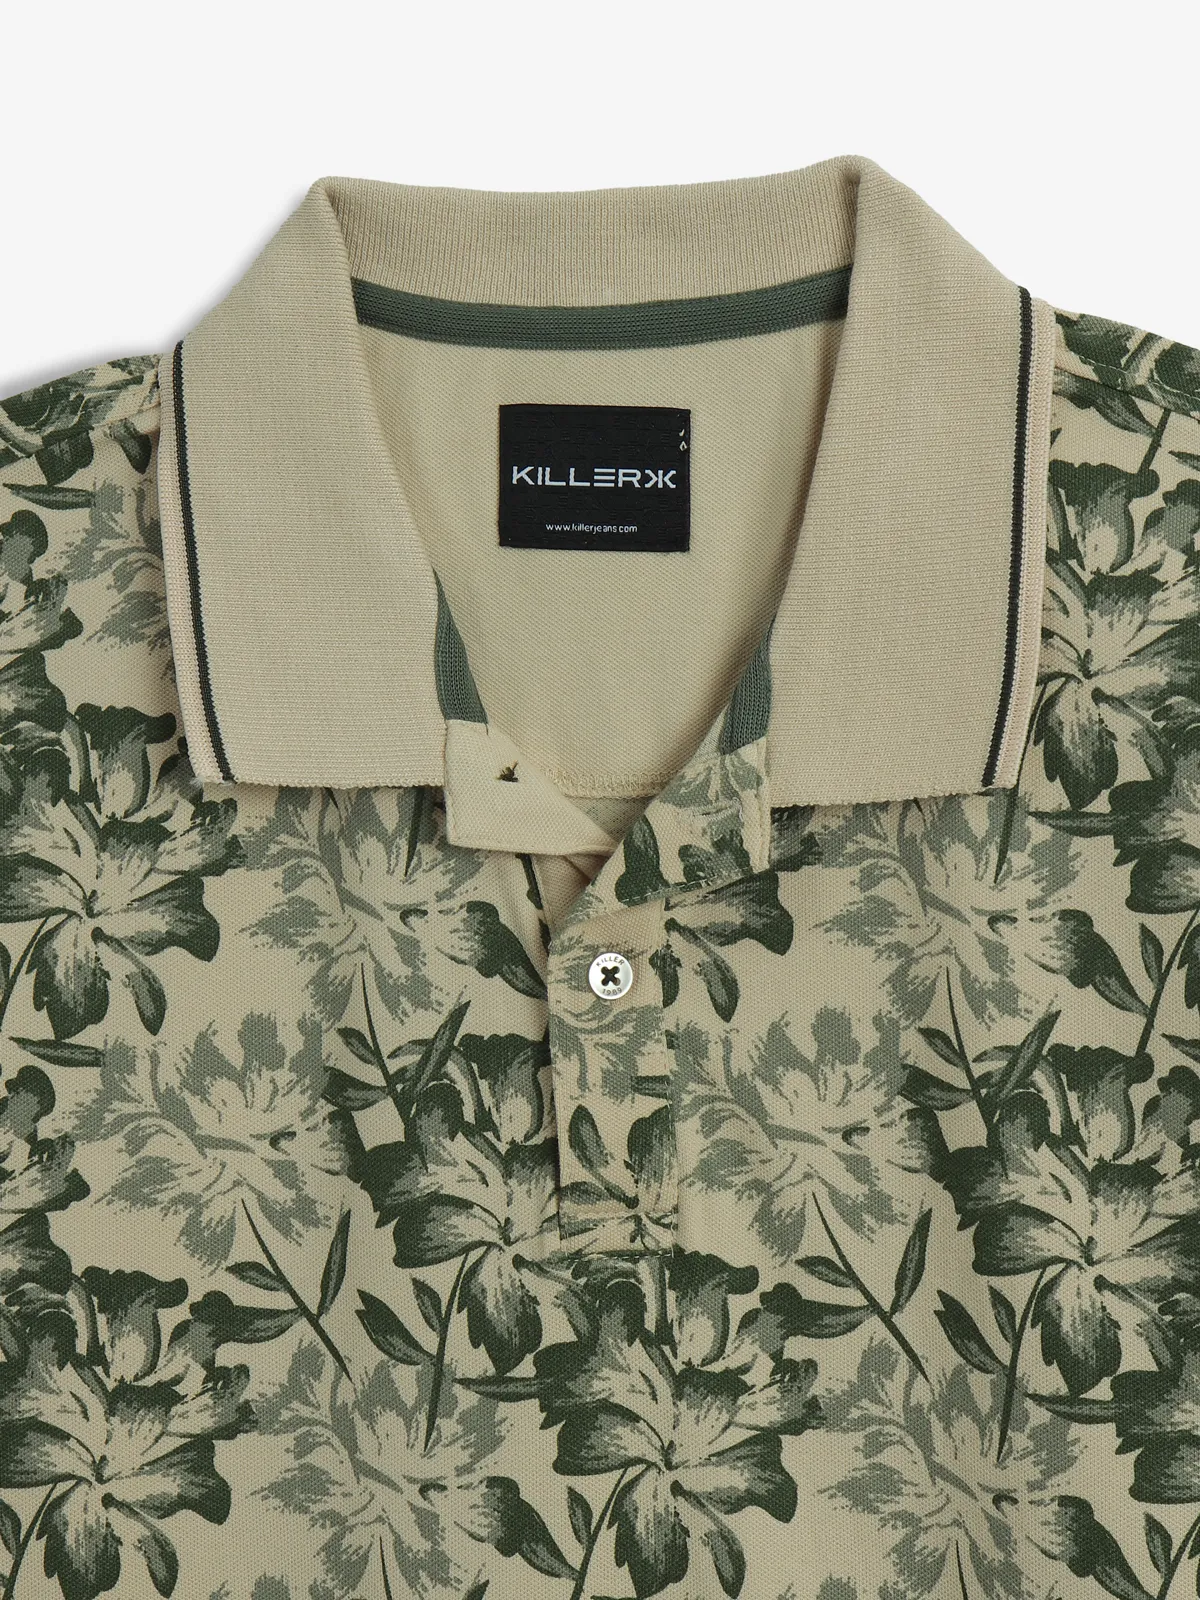 KILLER beige and green printed cotton t-shirt